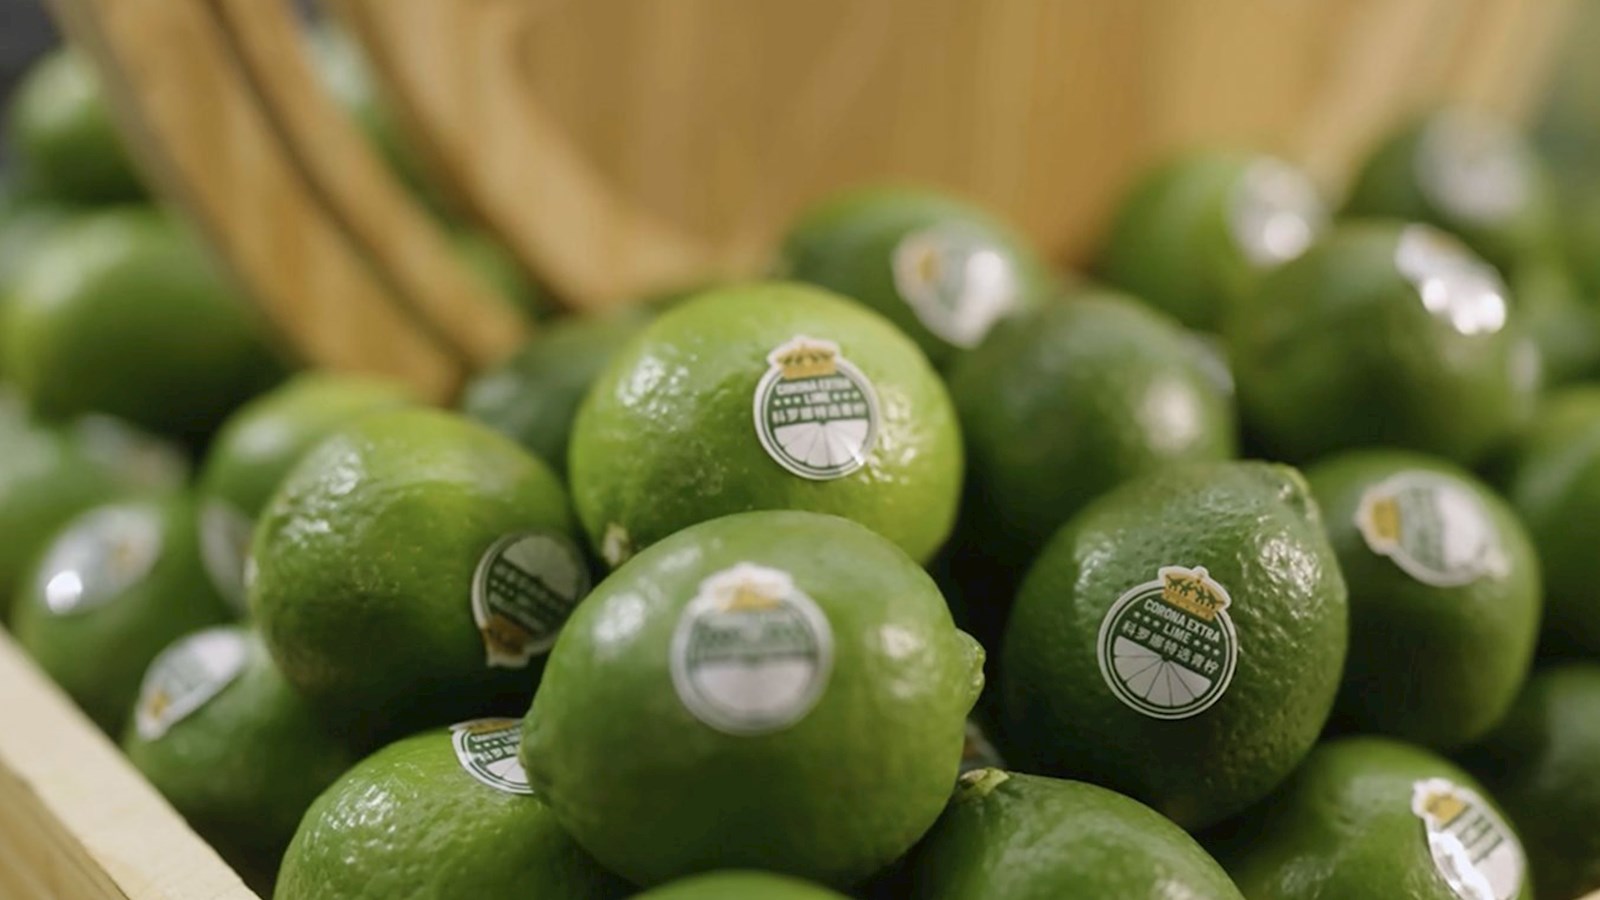 Corona Extra Limes in a basket